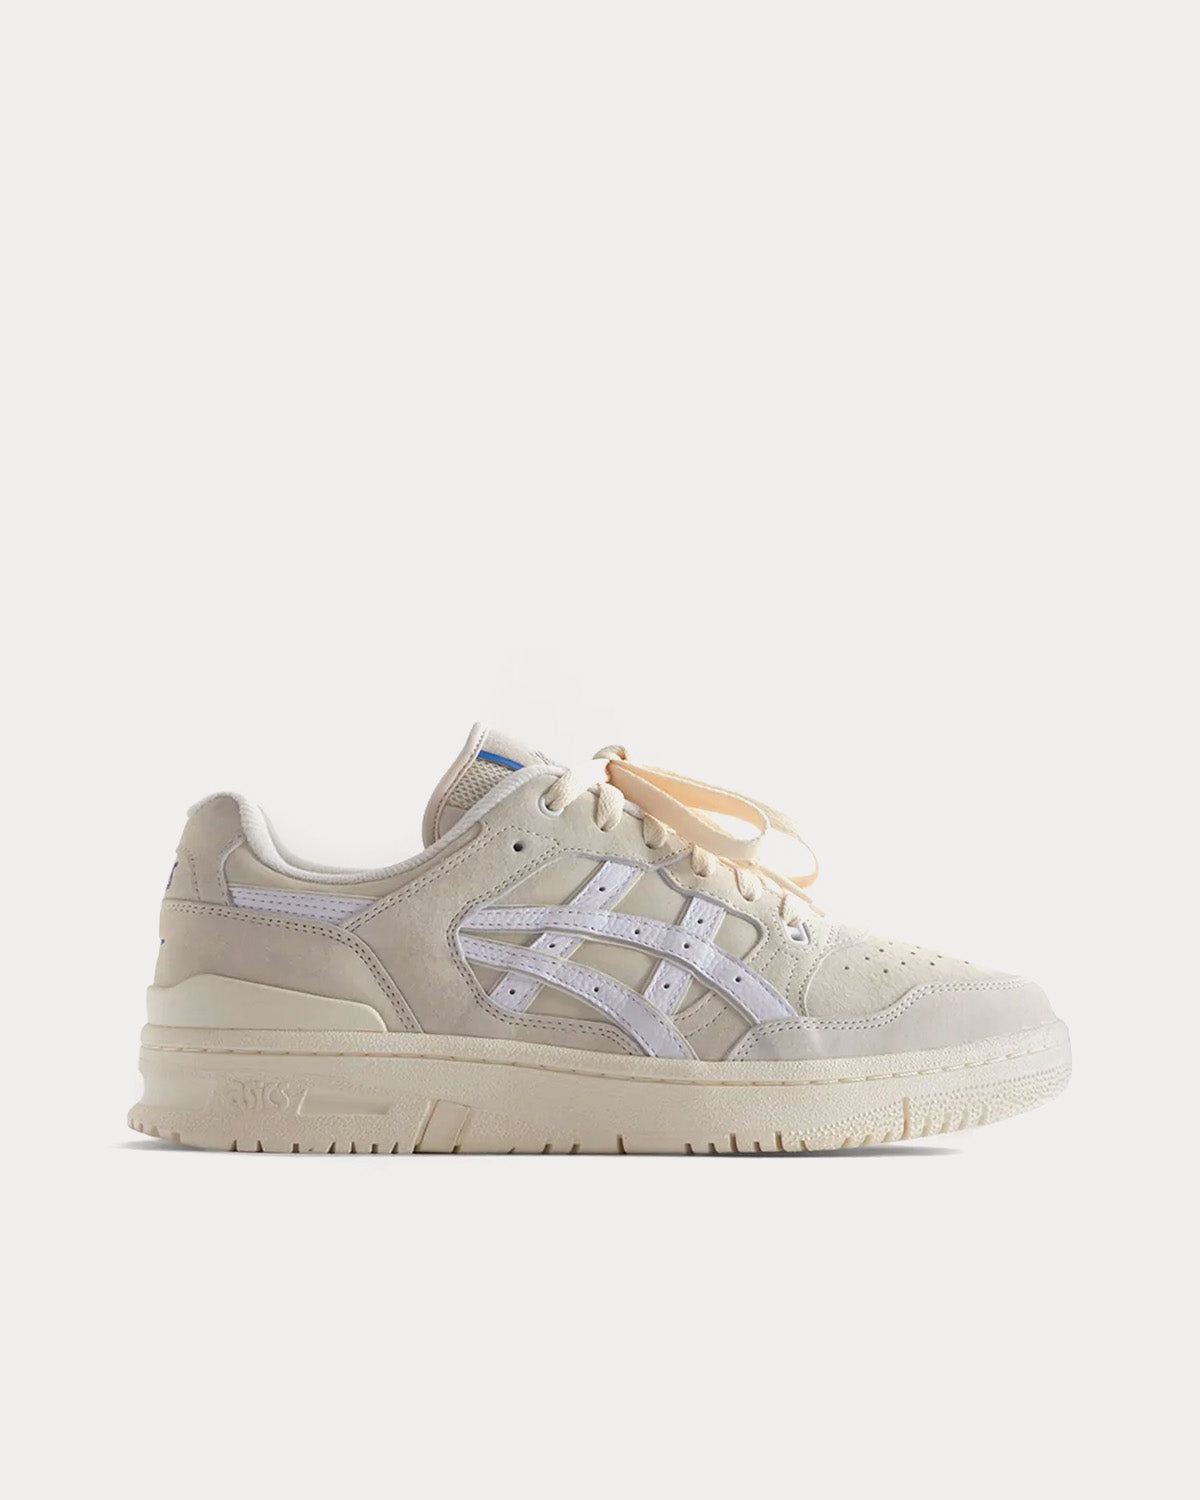 Asics x Kith - Ex89 Suede Tan Low Top Sneakers